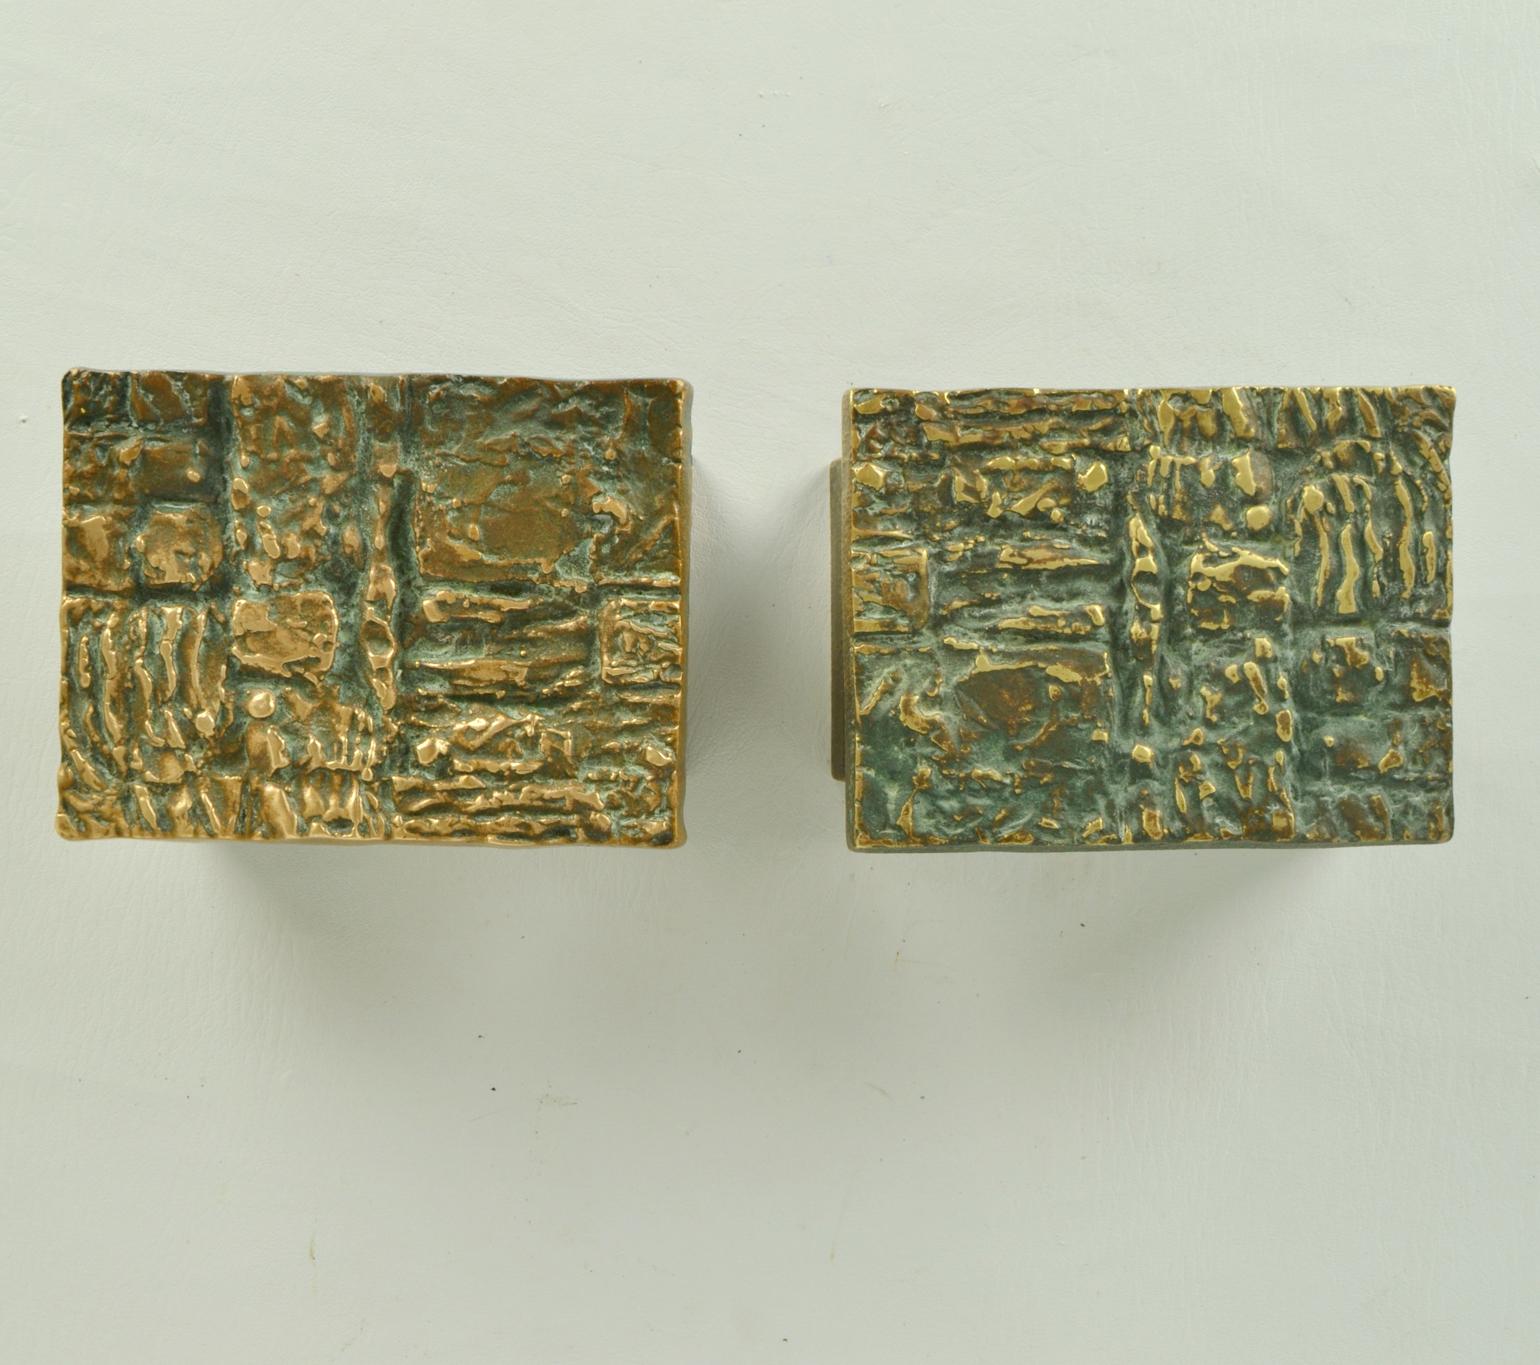 Set of two rectangular horizontal Brutalist bronze door handles with abstract relief and irregular textures, European 1970's. Their relief with original patina is expressive and will give real personality to a house.
These identical handles can be